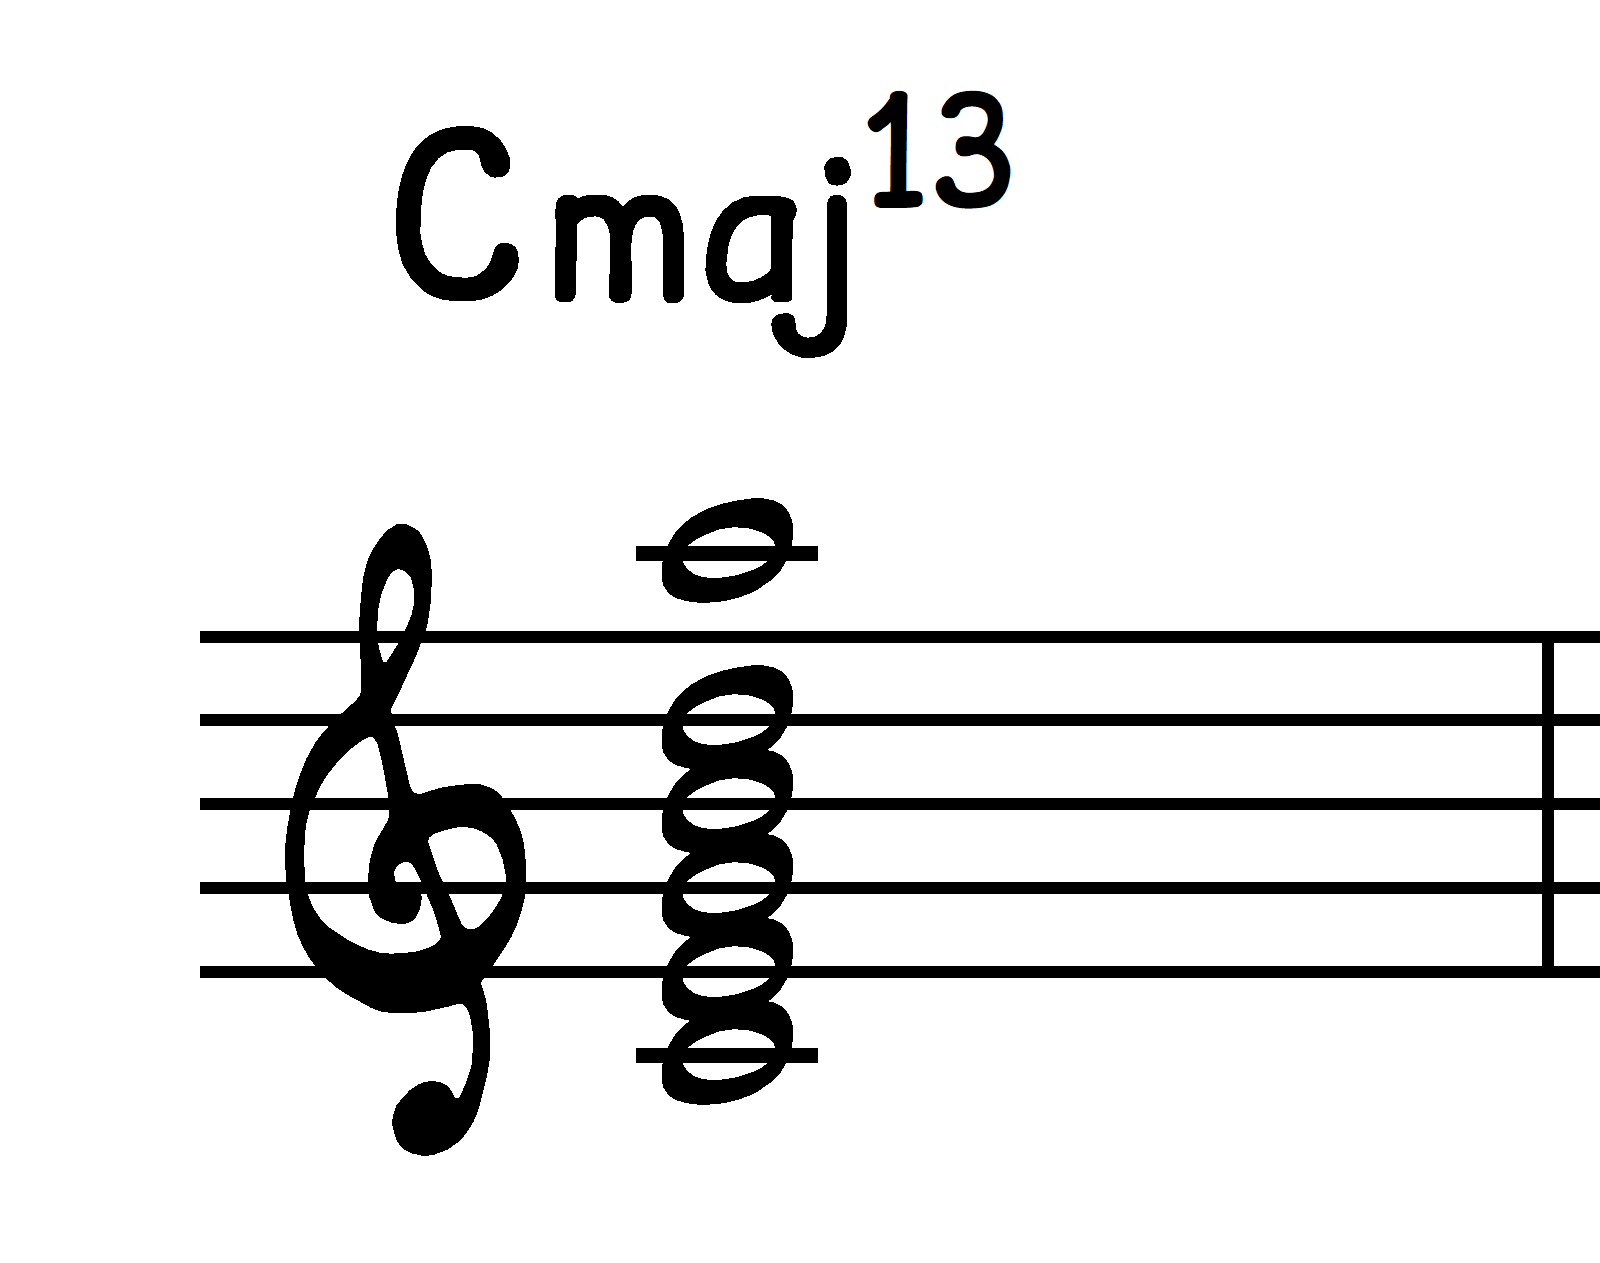 A Cmaj13 chord in close root position.